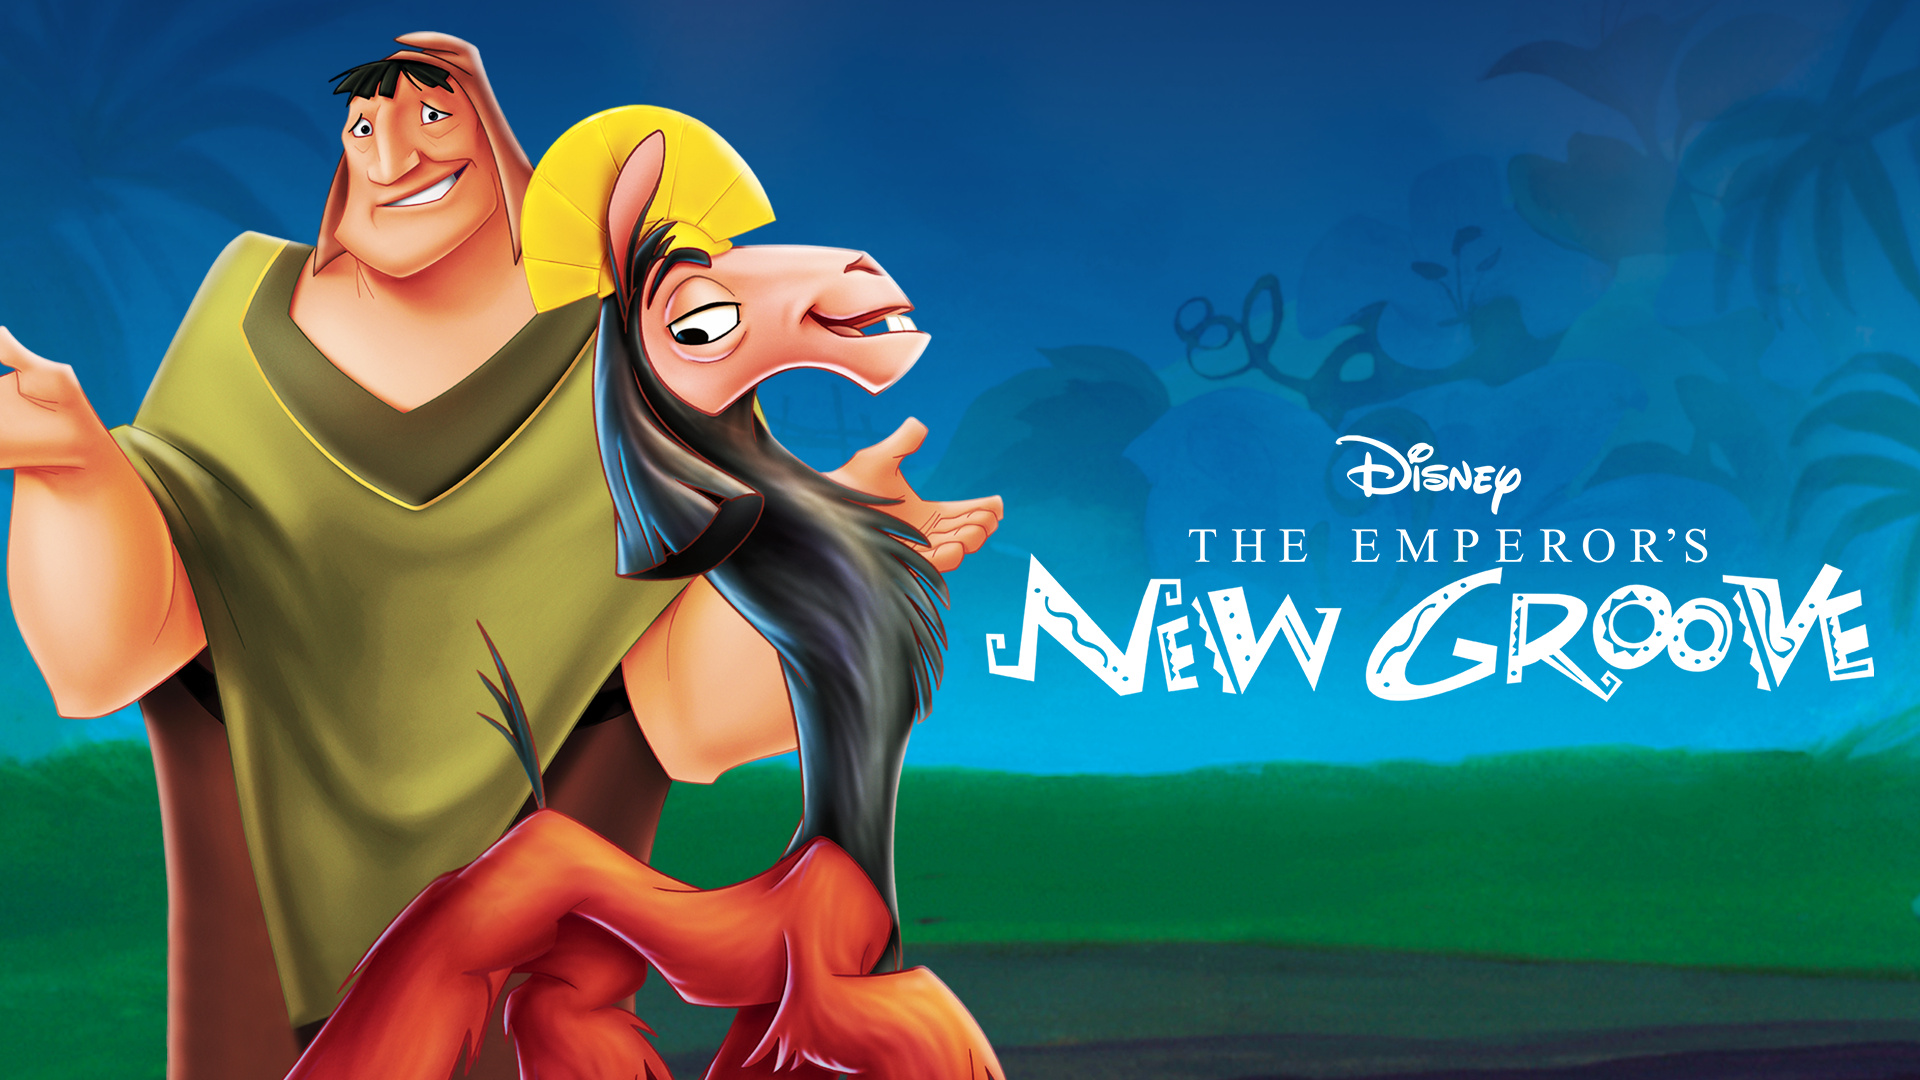 The emperor new groove. The Emperor's New Groove 2000. Дисней лама Император. The Emperor's New Groove 2000 Постер.